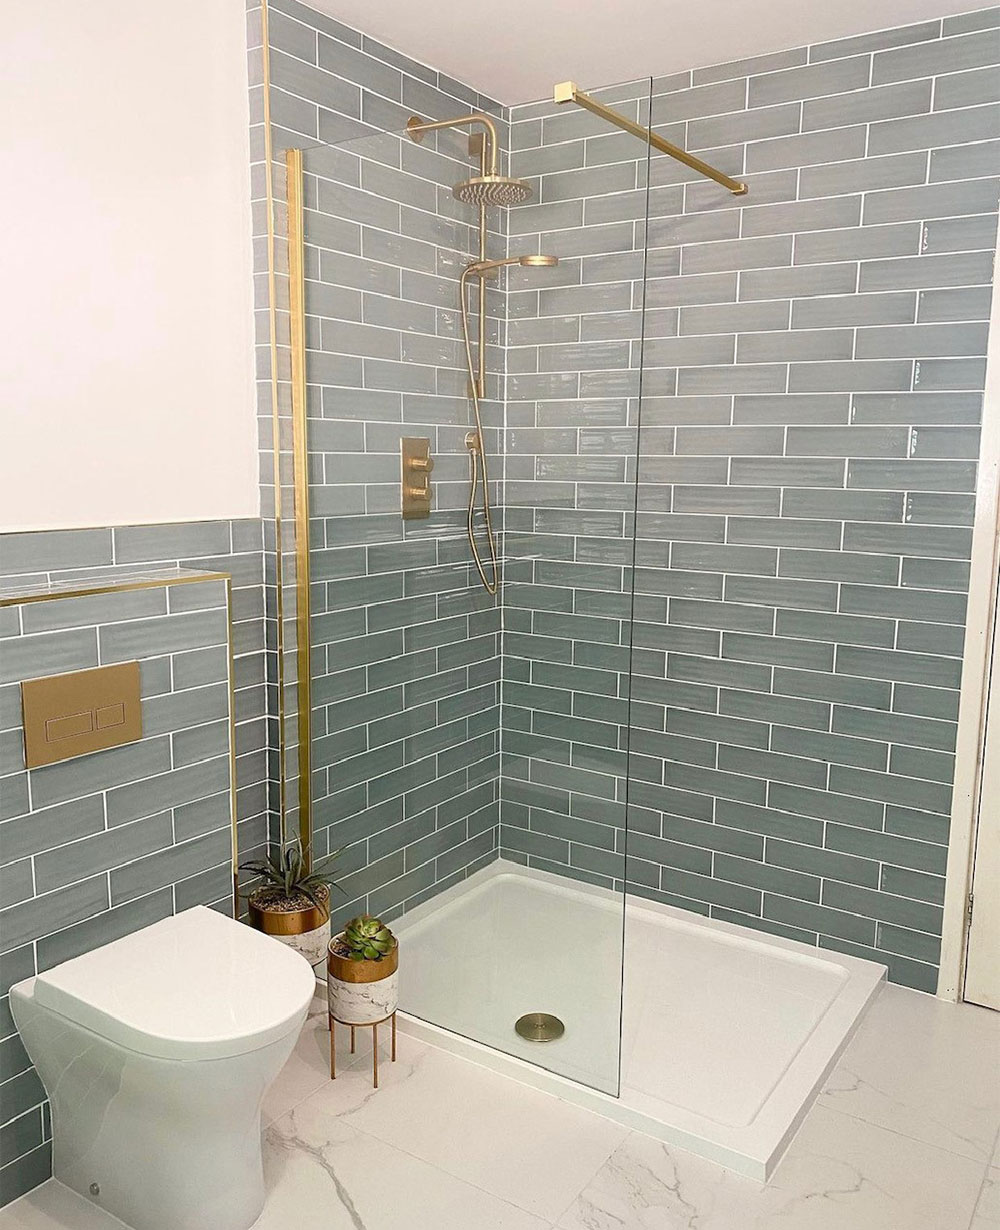 Bathroom Bliss | Projects